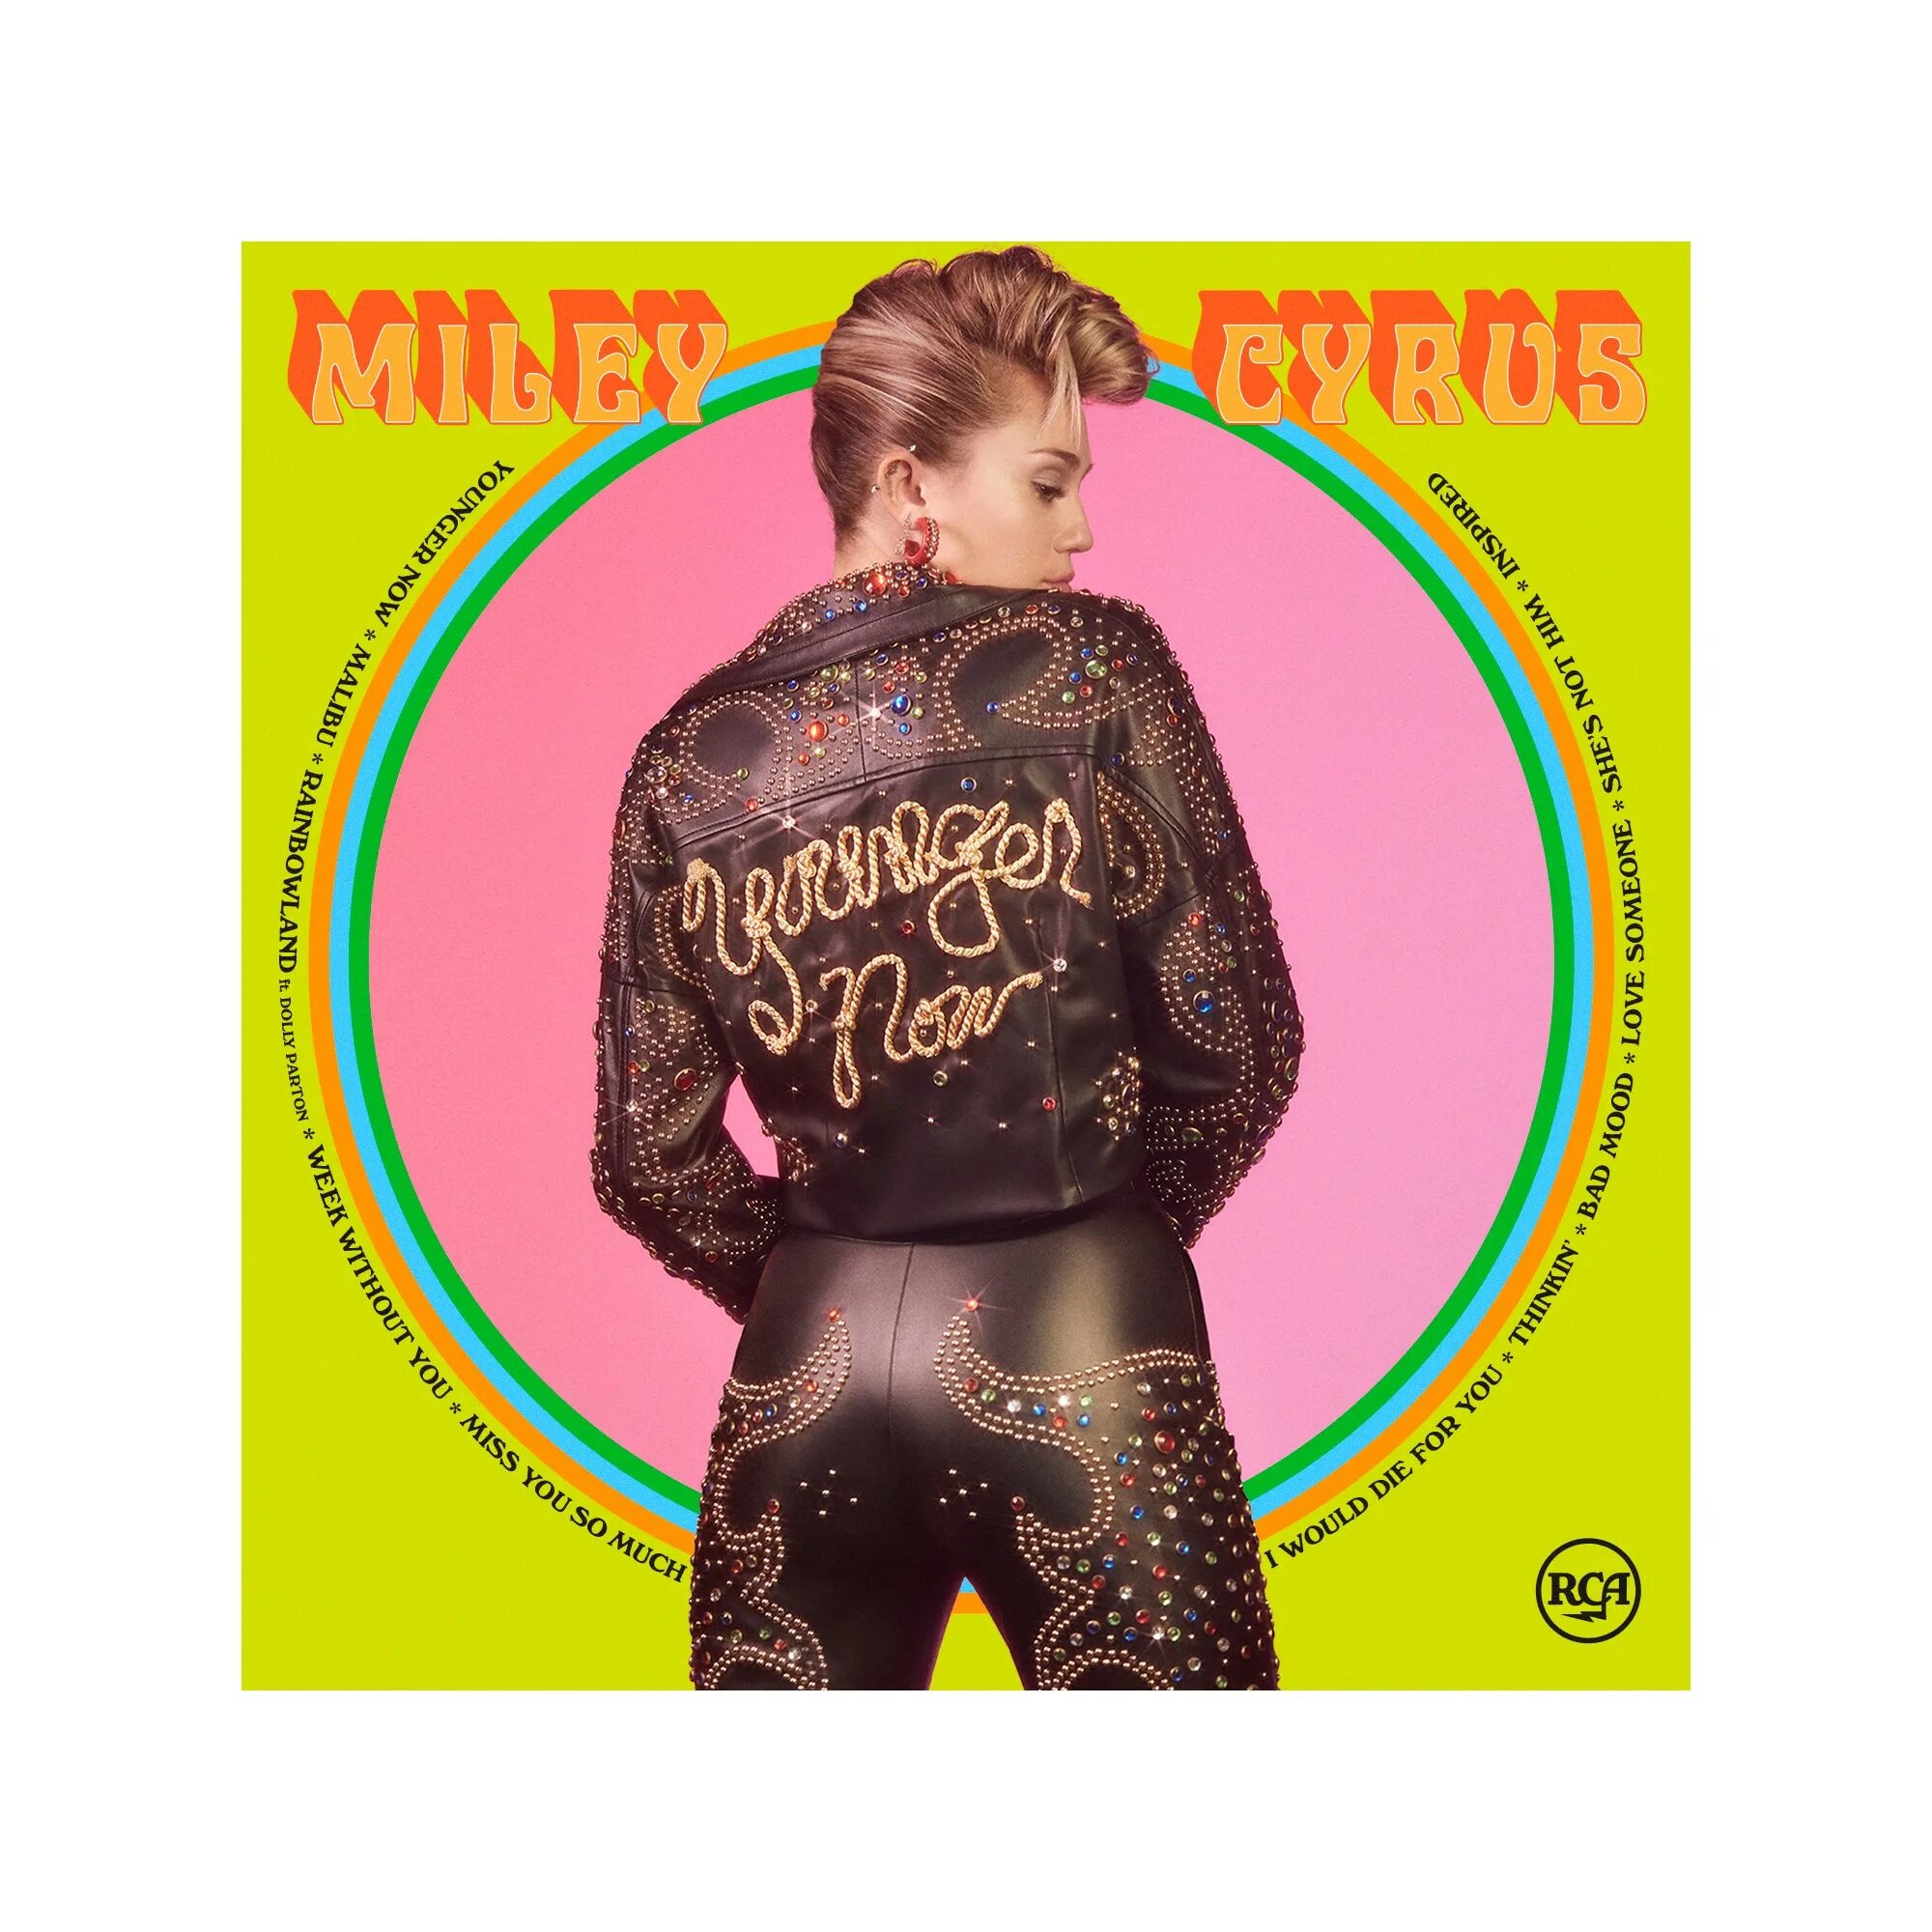 Виниловая пластинка Miley Cyrus. Miley Cyrus younger Now. Miley Cyrus - (2017) - younger Now - CD Covers. Miley Cyrus albums discography. Cyrus used to be